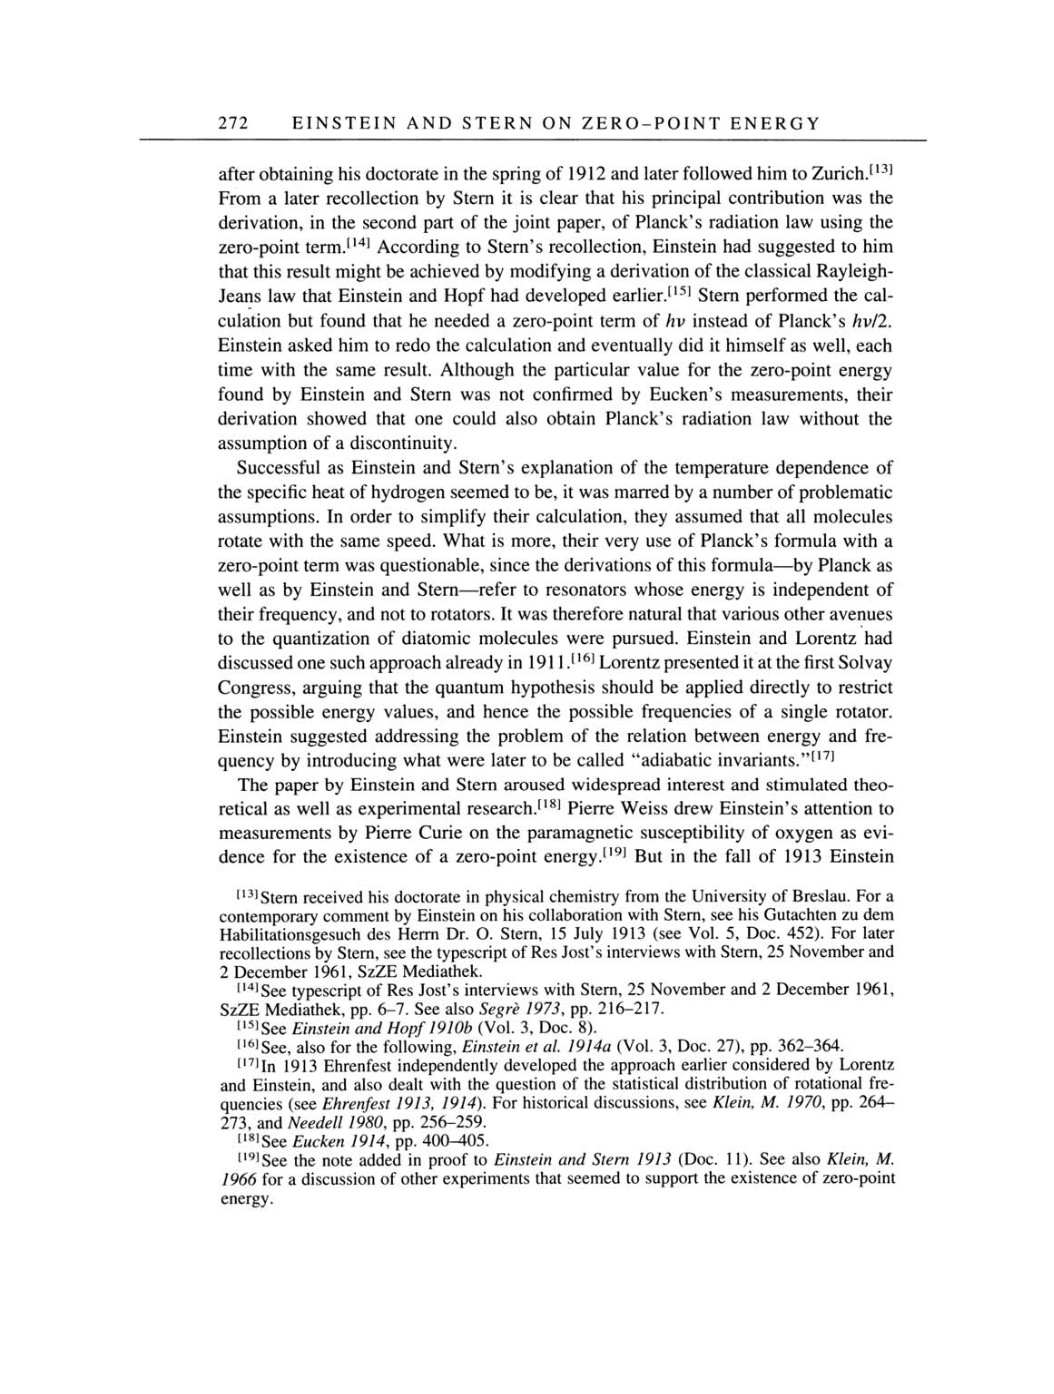 Volume 4: The Swiss Years: Writings 1912-1914 page 272